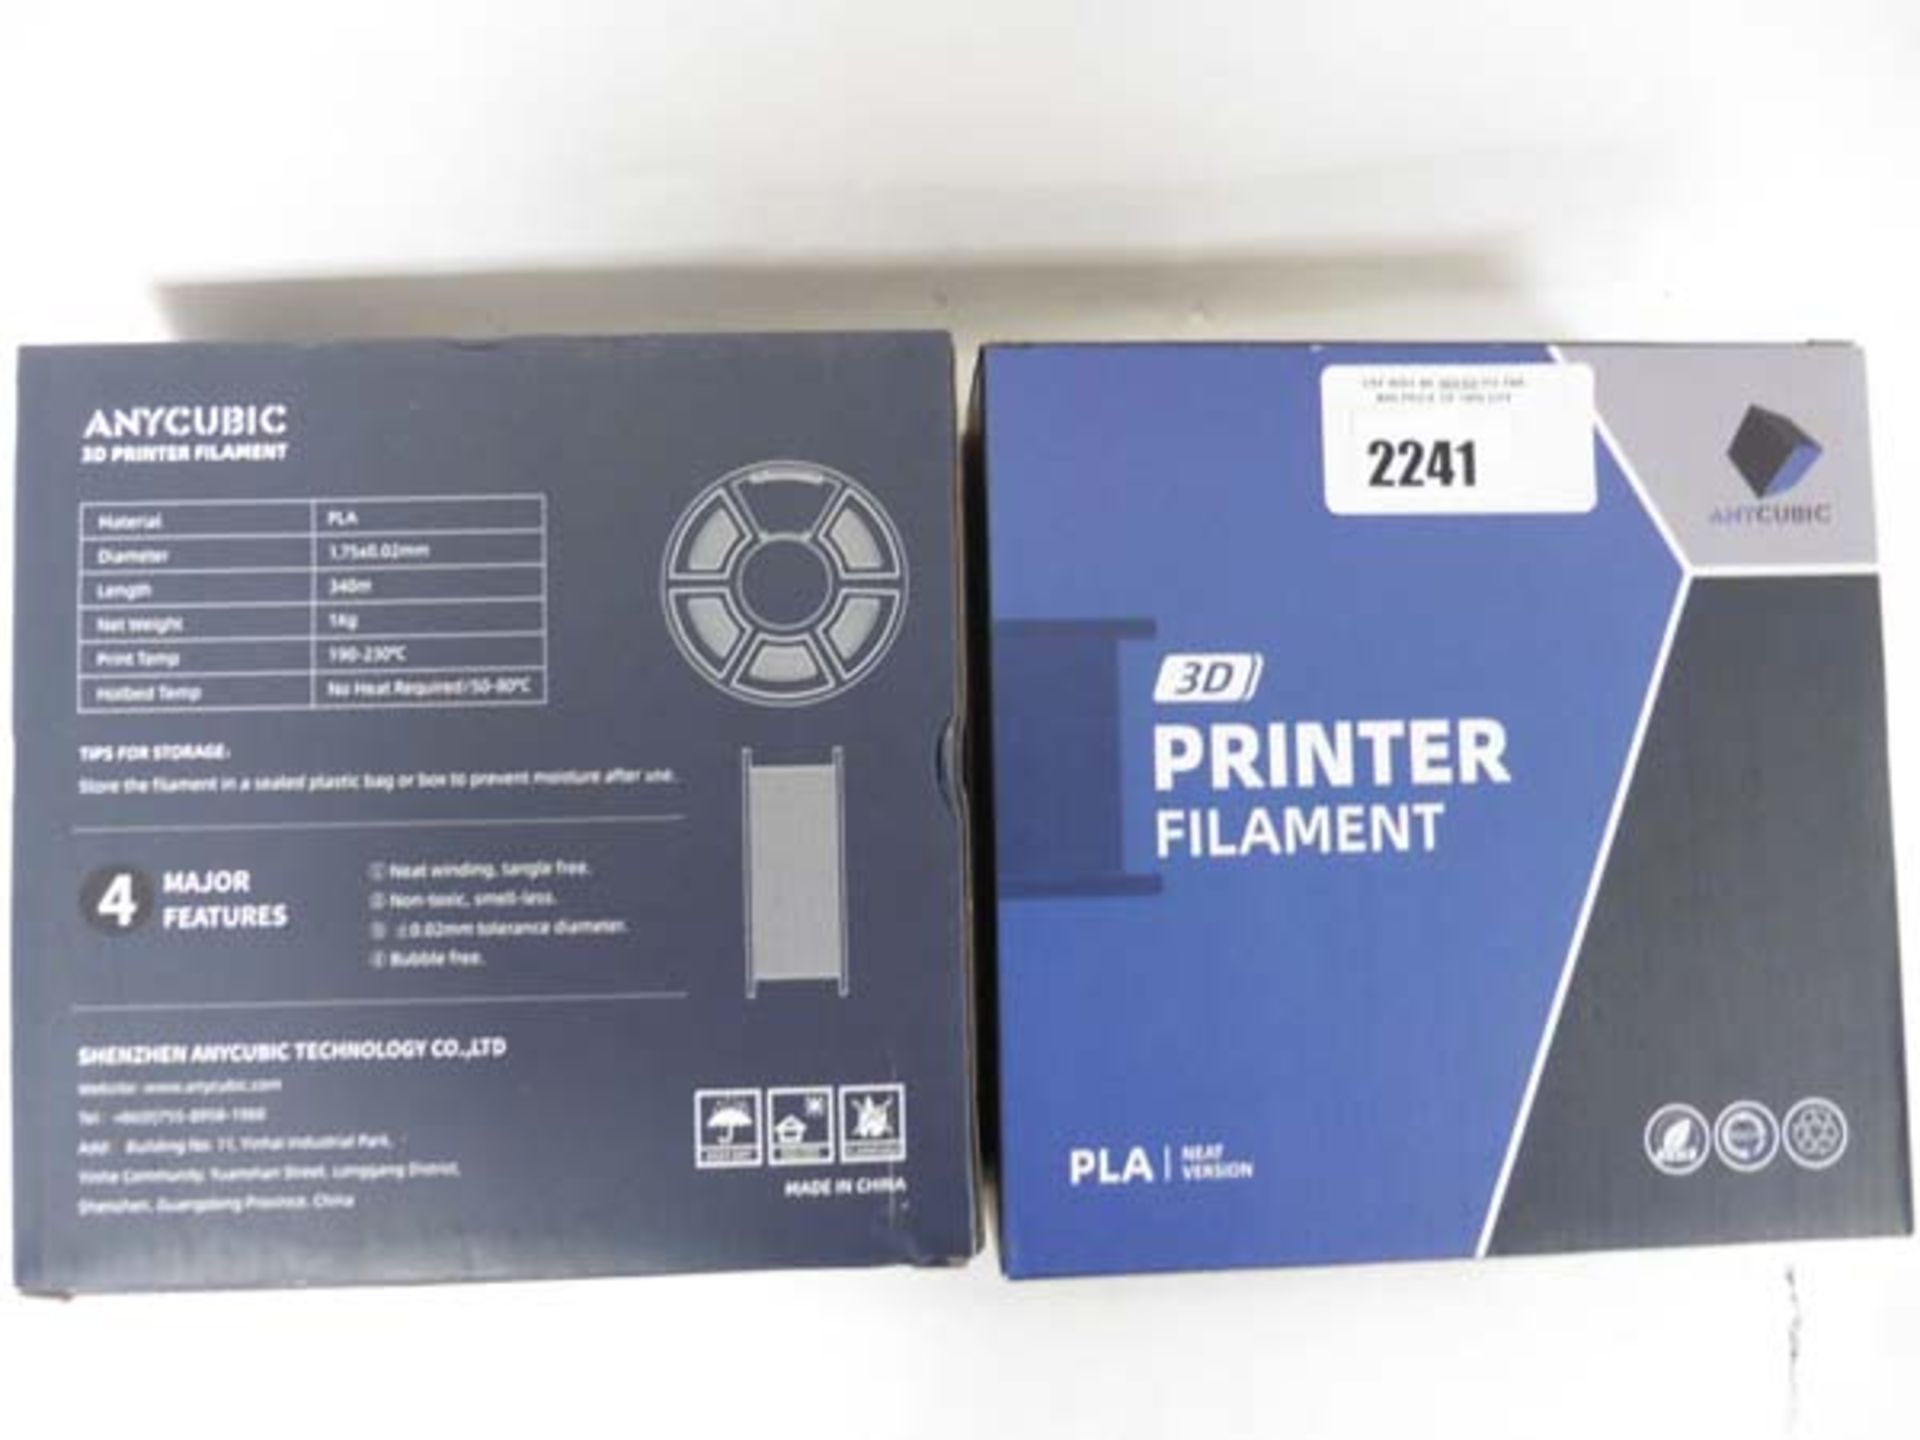 2 boxes of Anycubic 3D printer filament PLA neat version grey 1.75mm x 340m , 1kg each